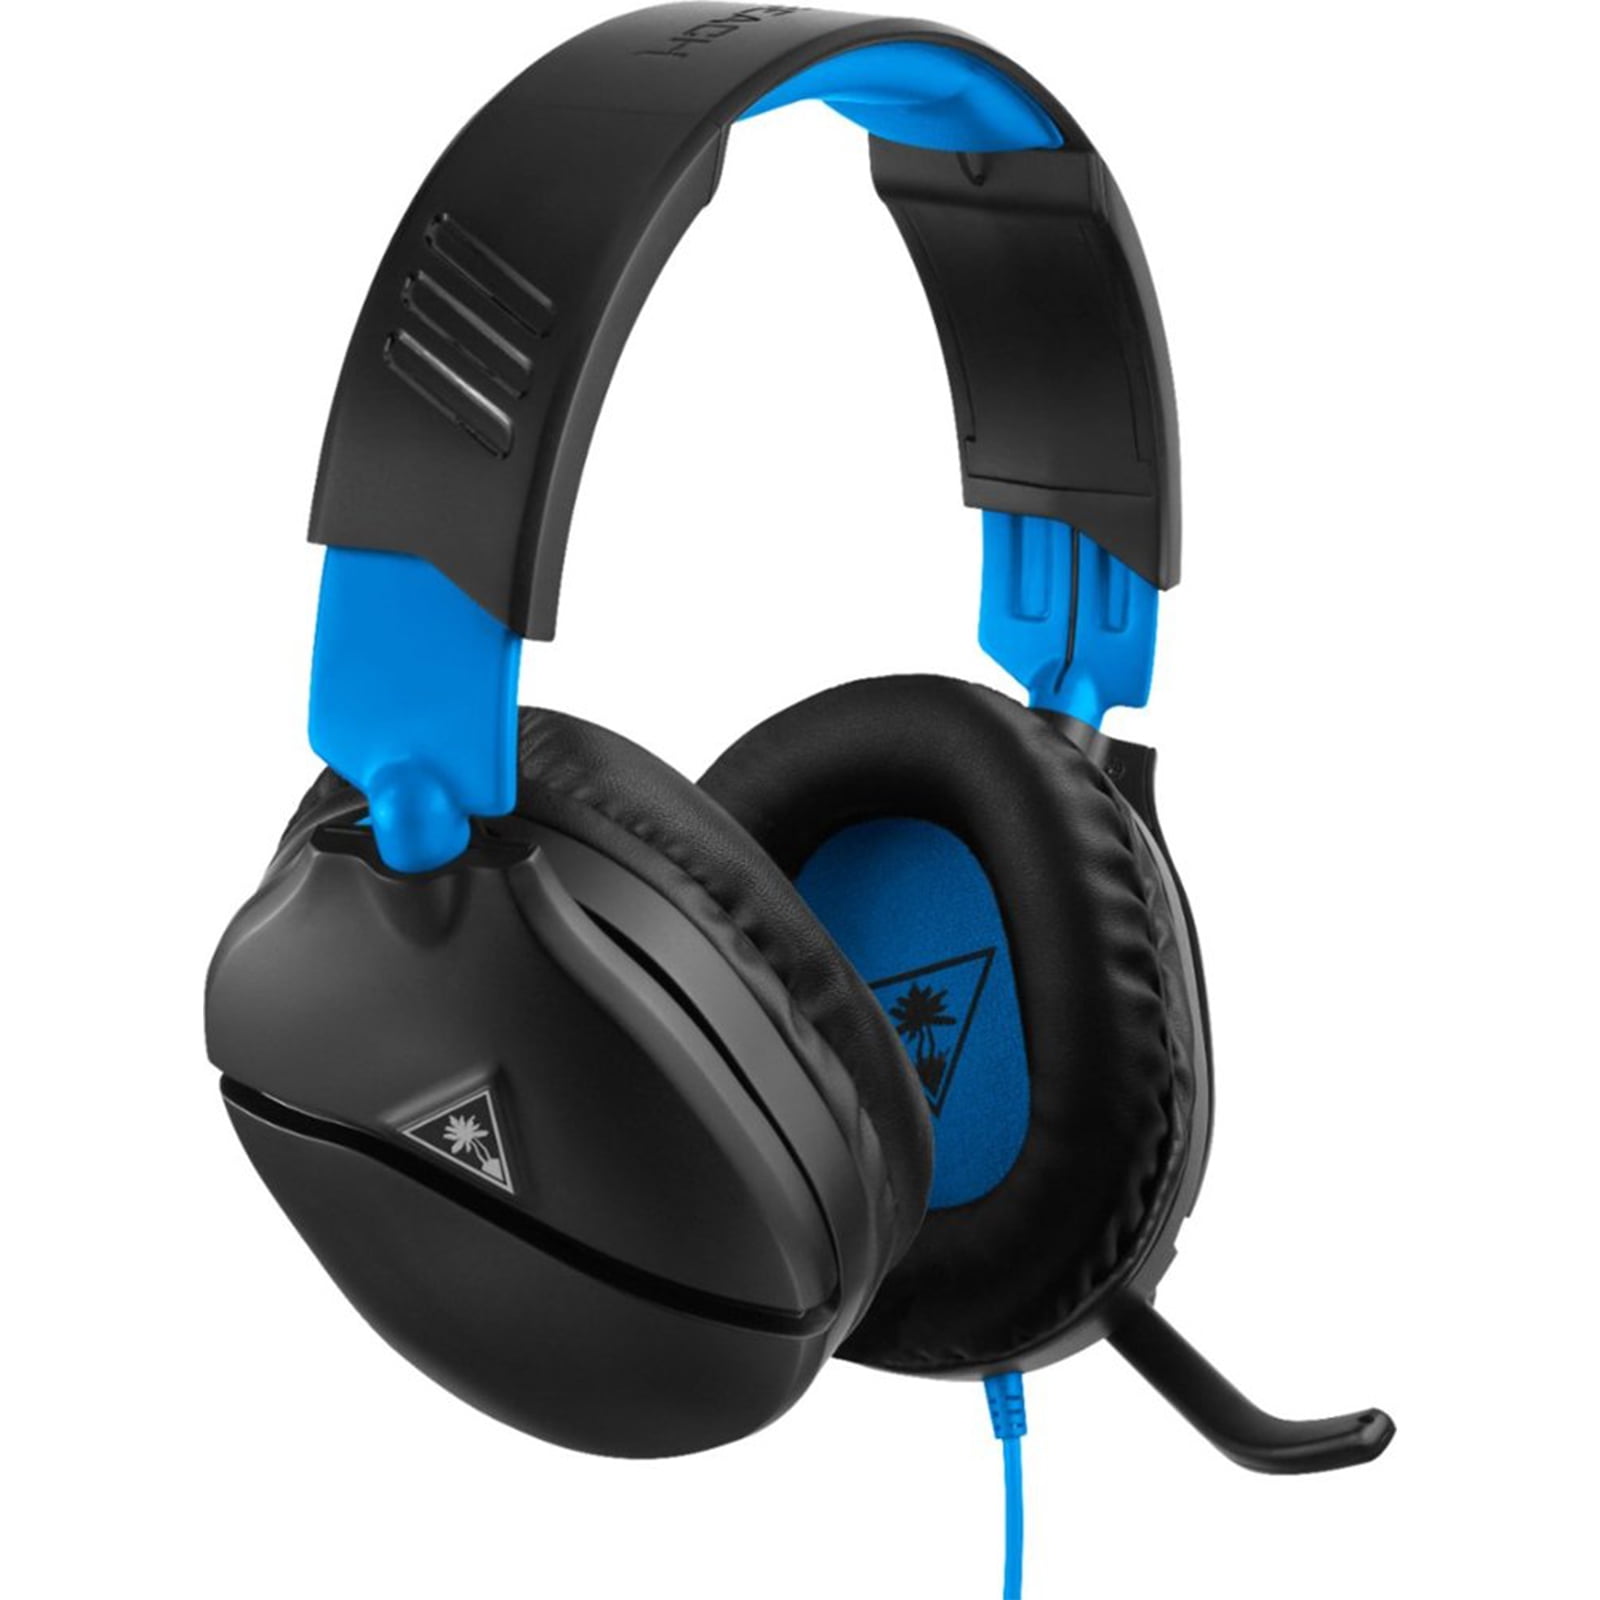 Turtle Recon 70 PlayStation Gaming Headset for PS5, Xbox Series X, Series S, Xbox One, Nintendo Switch, Mobile, & PC with 3.5mm - Flip-to-Mute Mic, 40mm Speakers, 3D Audio -